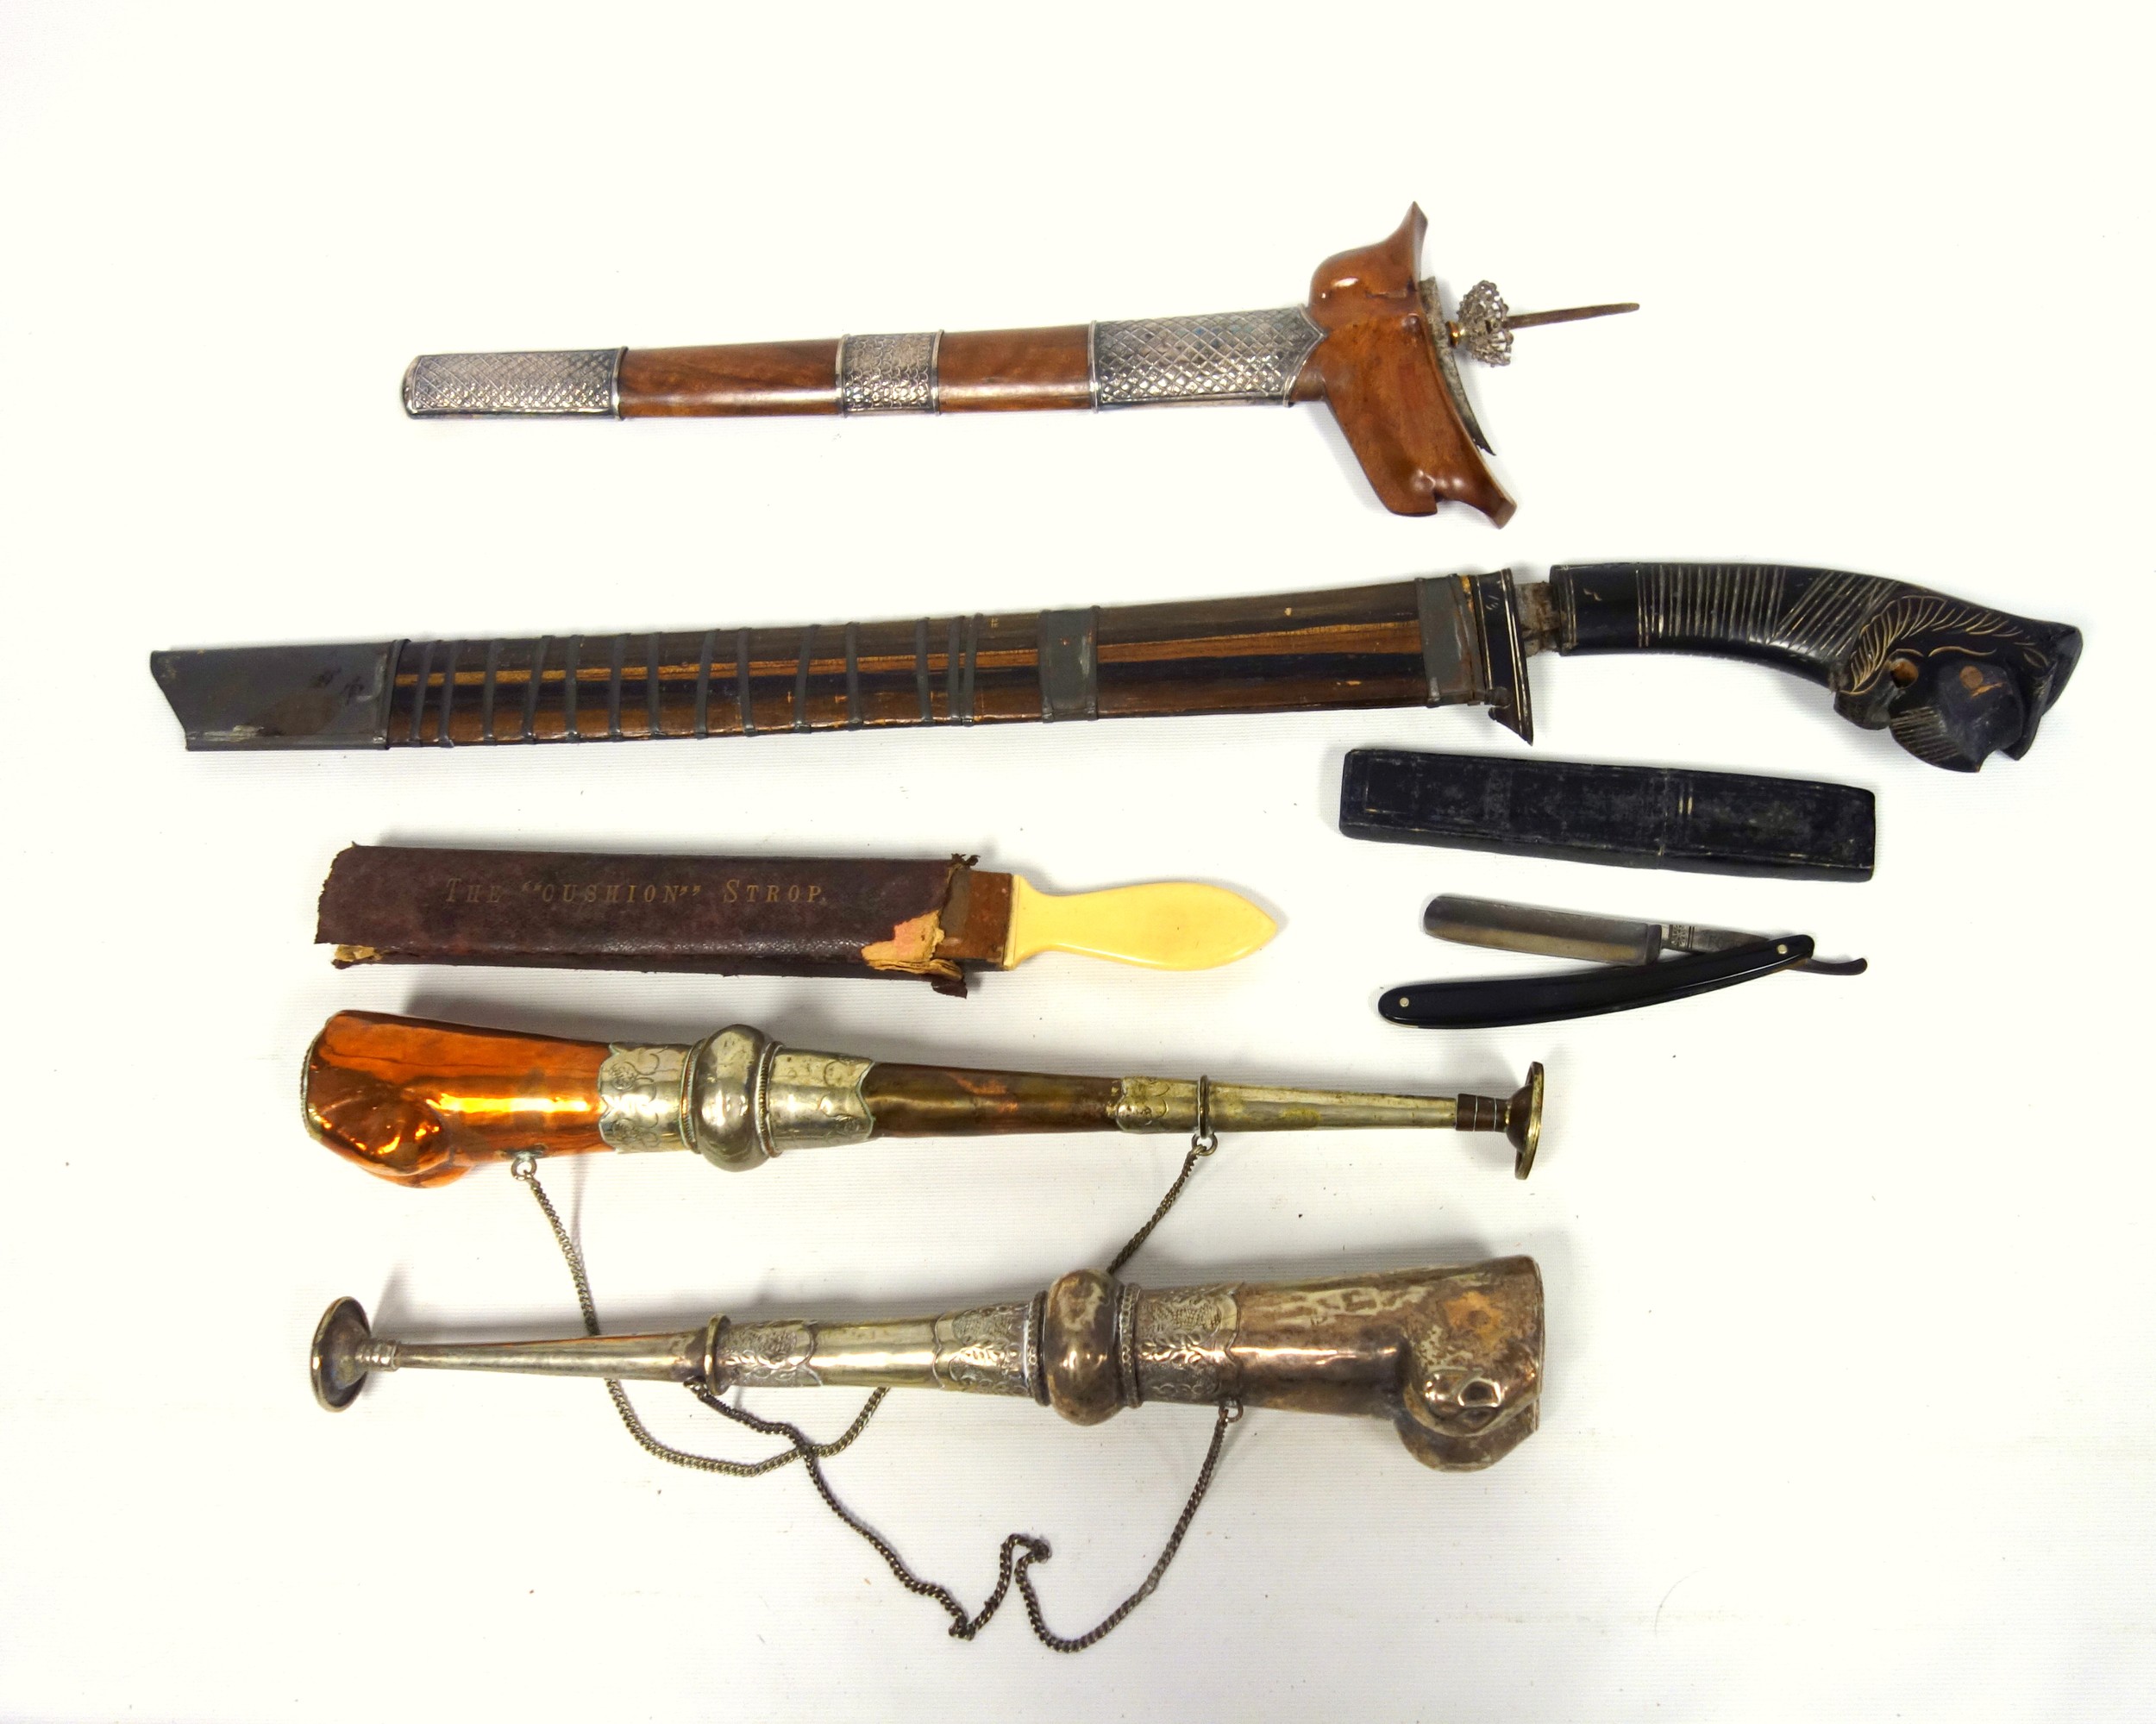 2 Eastern semi plated metal horns, 37.5 and 36cm long; 2 knives in scabbards, cut throat knife,